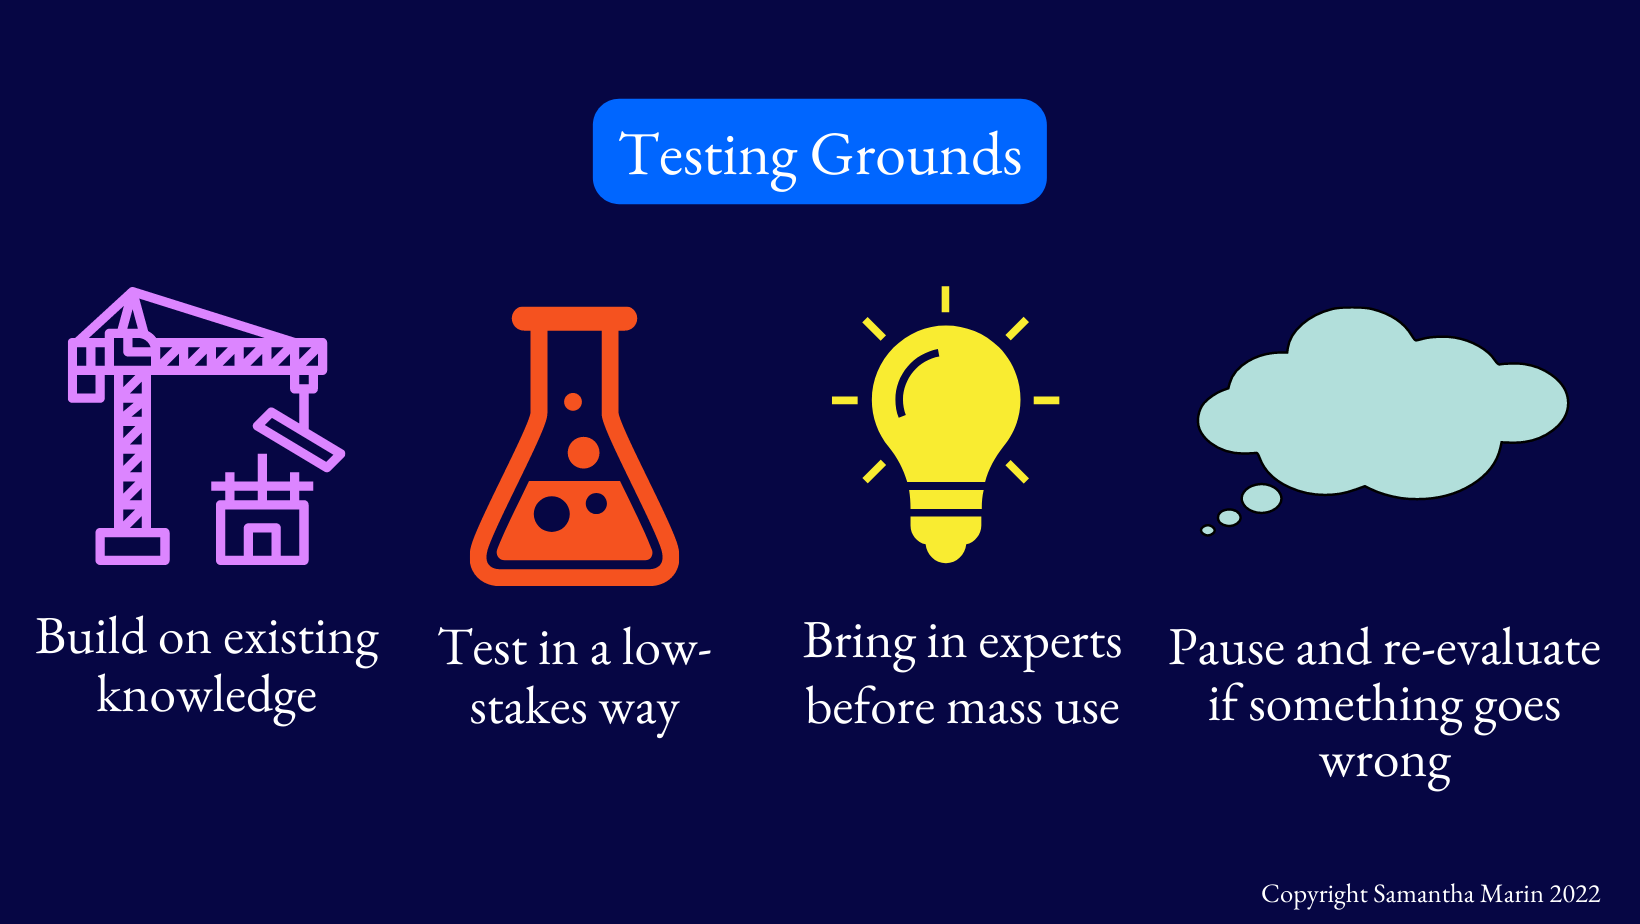 Four ways to prep testing grounds for quick and safe rollout.